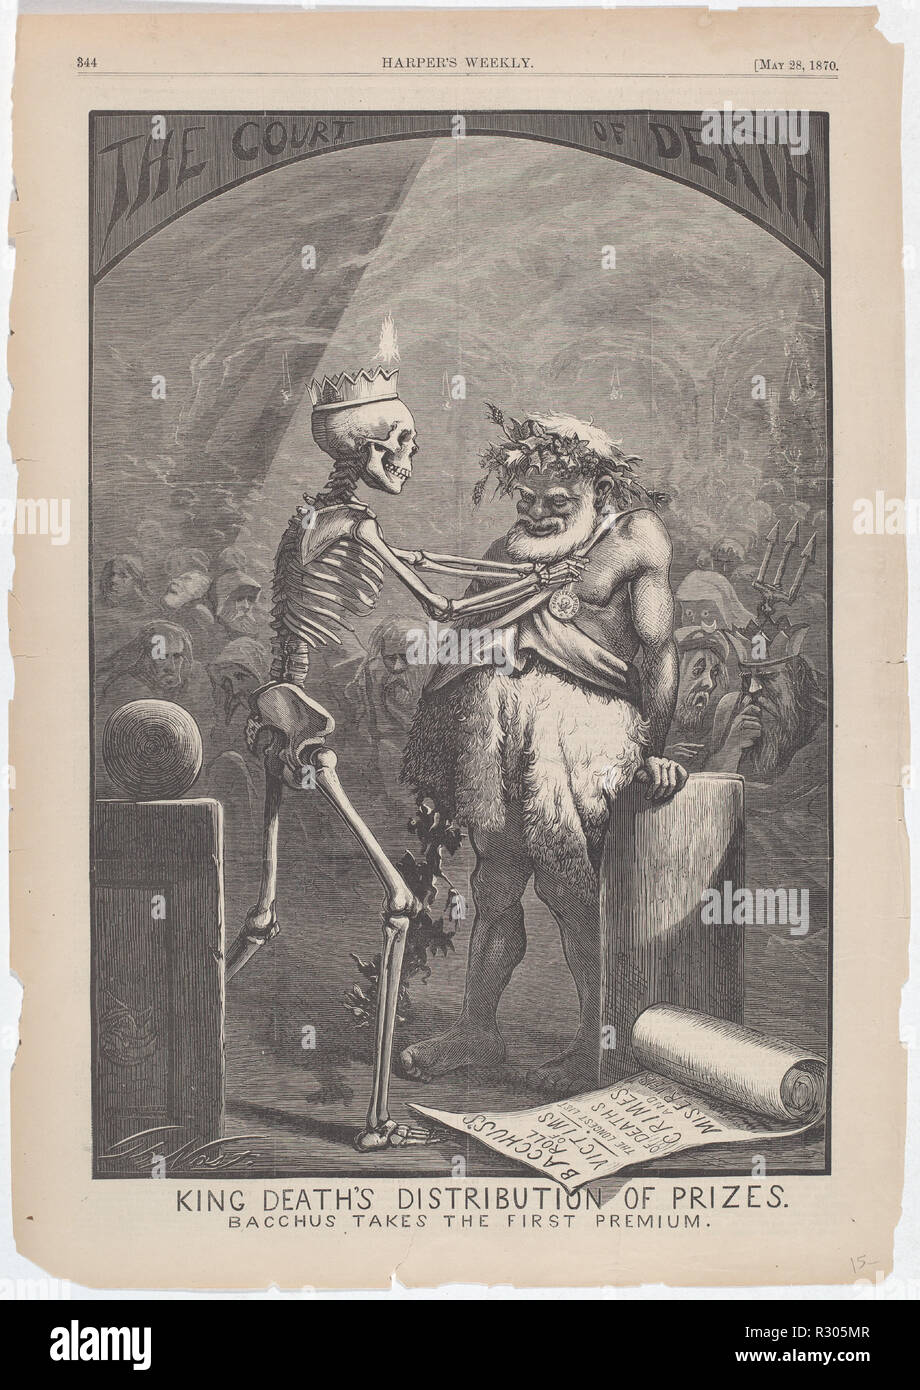 King Death's Distribution of Prizes. Dated: 1870. Dimensions: sheet: 40.01 × 28.26 cm (15 3/4 × 11 1/8 in.). Medium: wood engraving in black on newsprint. Museum: National Gallery of Art, Washington DC. Author: Thomas Nast. Stock Photo